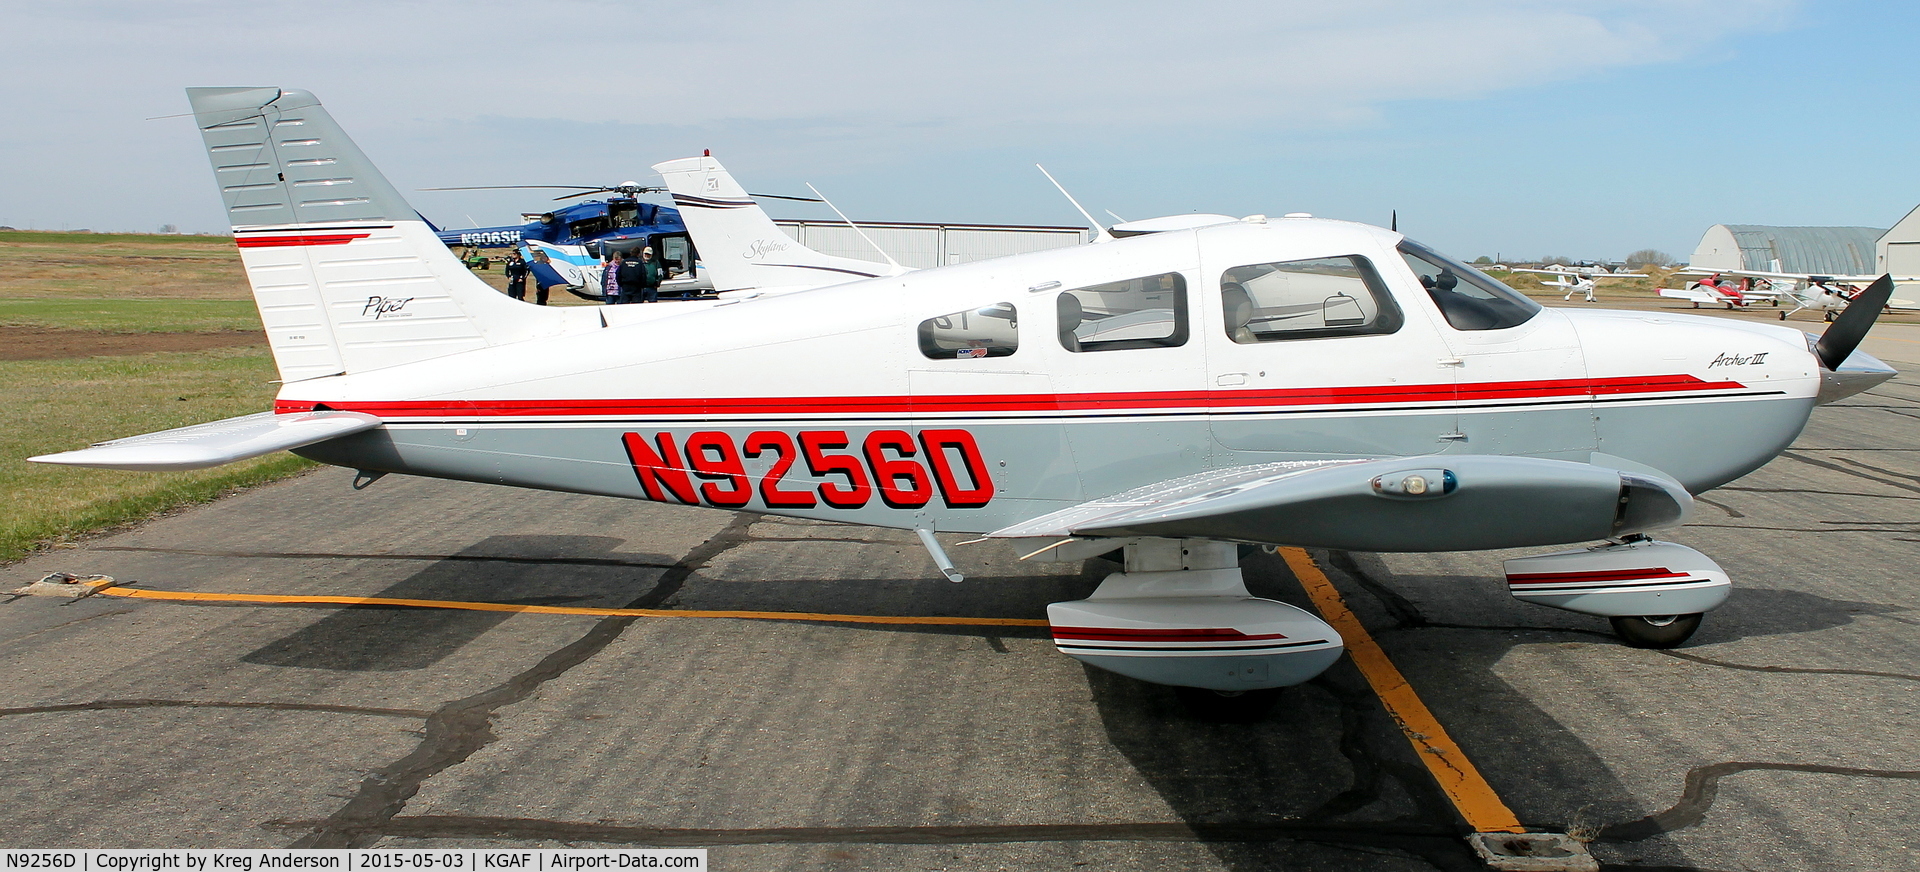 N9256D, 1995 Piper PA-28-181 Archer II C/N 2890227, 2015 EAA Chapter 380 Fly-in